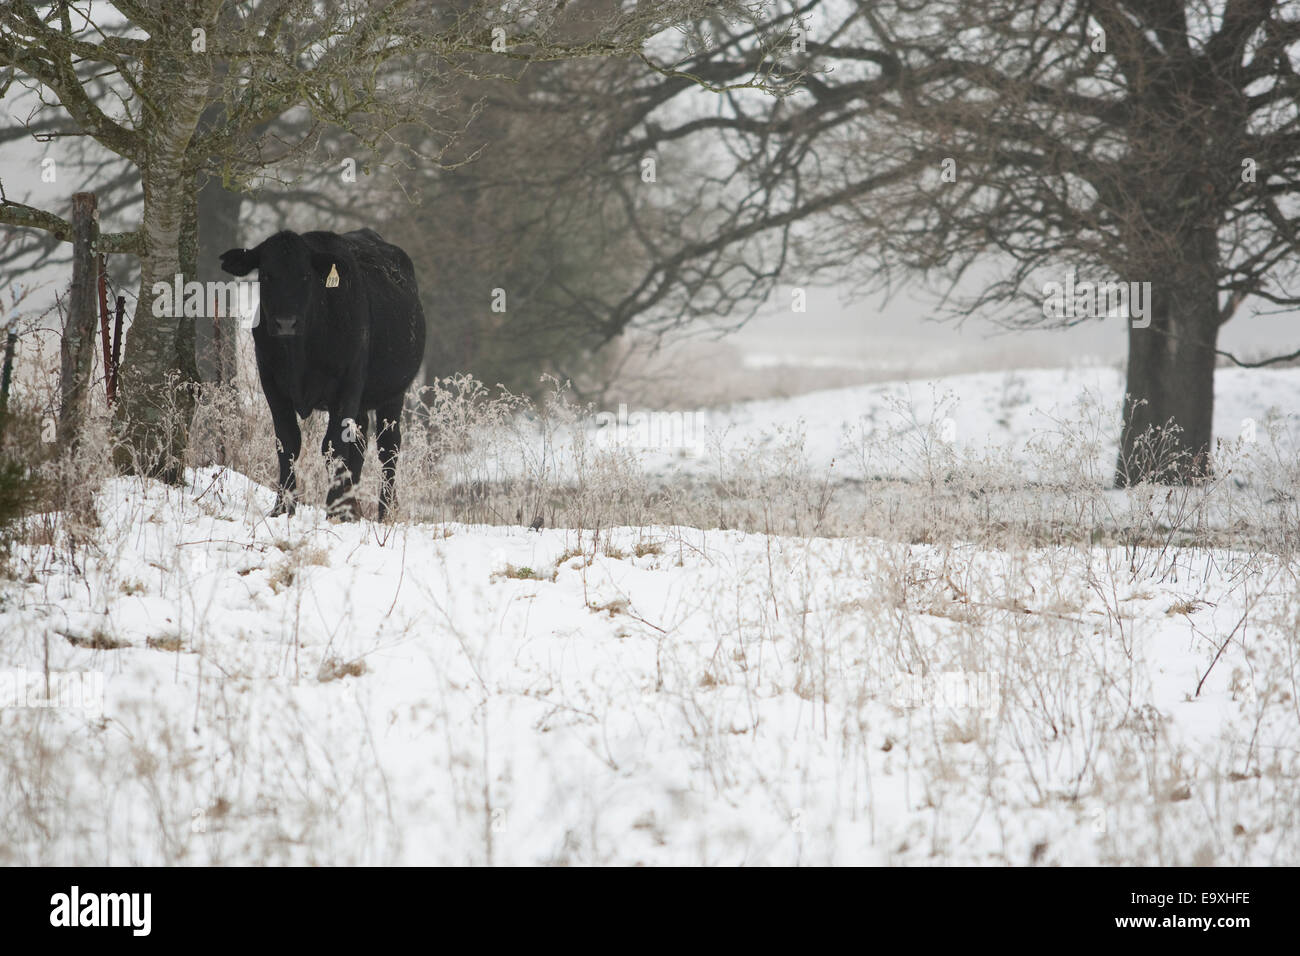 Livestock - An Angus beef cow standing along an old fence during a snow storm / near Telephone, Texas, USA. Stock Photo